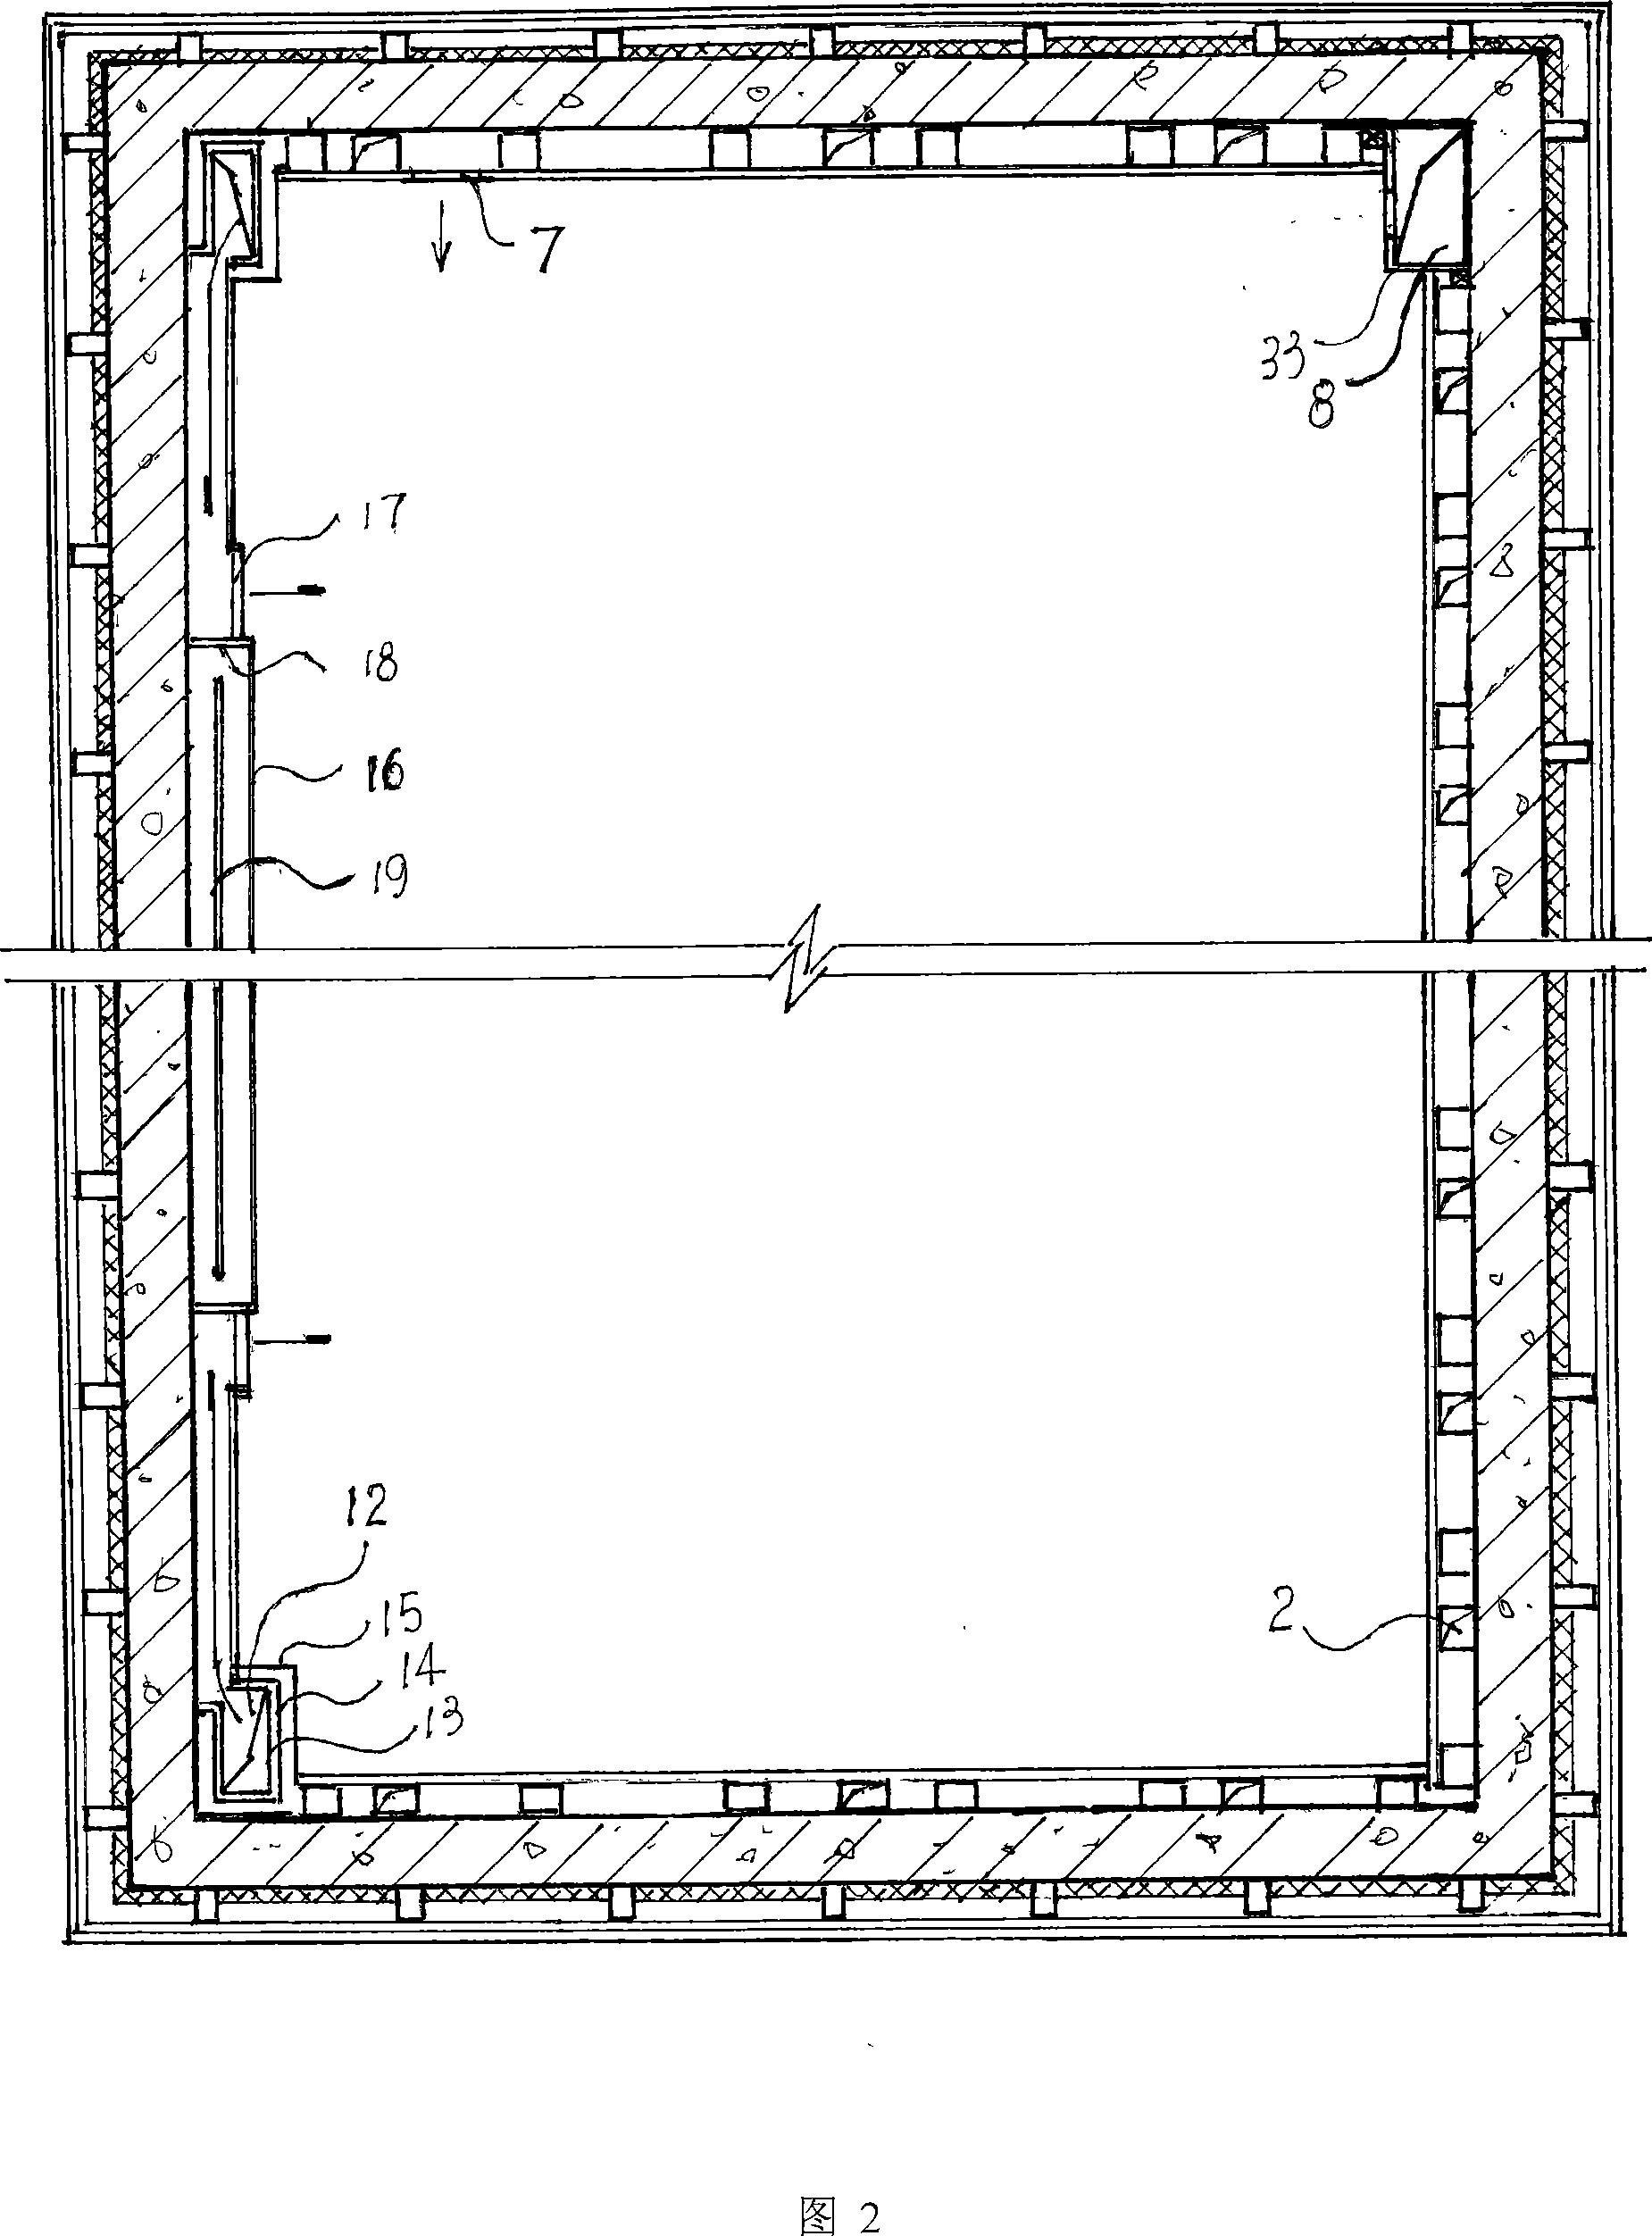 Environment-protection energy-saving ventilating air-conditioning sound-insulating novel building and construction method